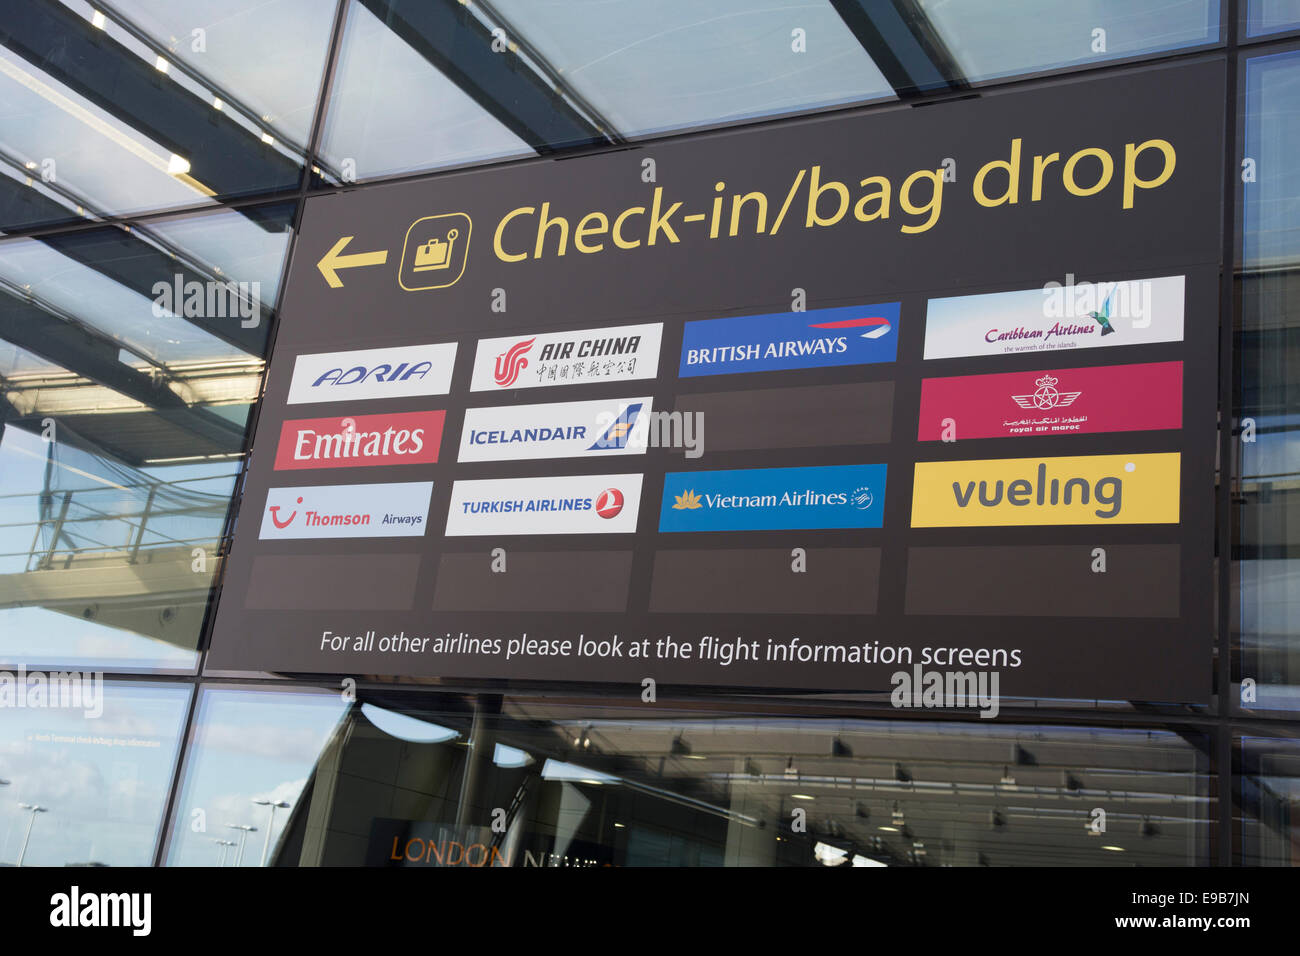 Sign at Gatwick Airport, London. Check-in/bag drop. Stock Photo